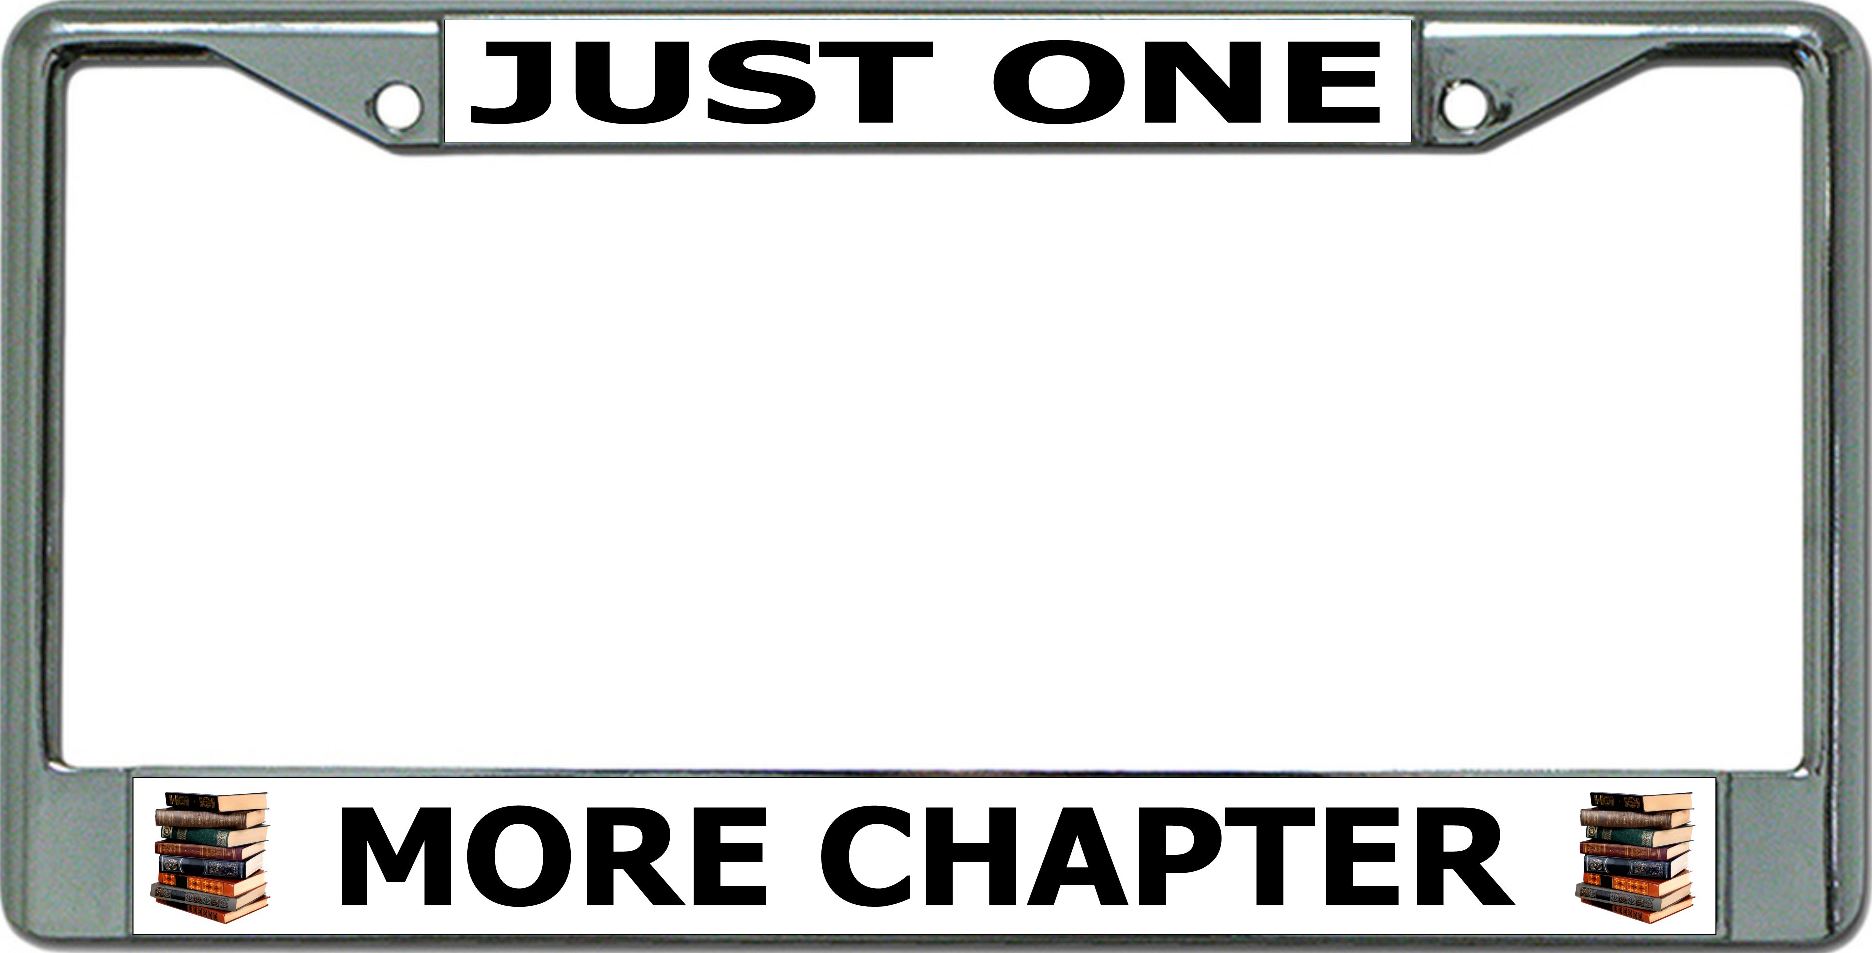 Just One More Chapter Chrome License Plate FRAME